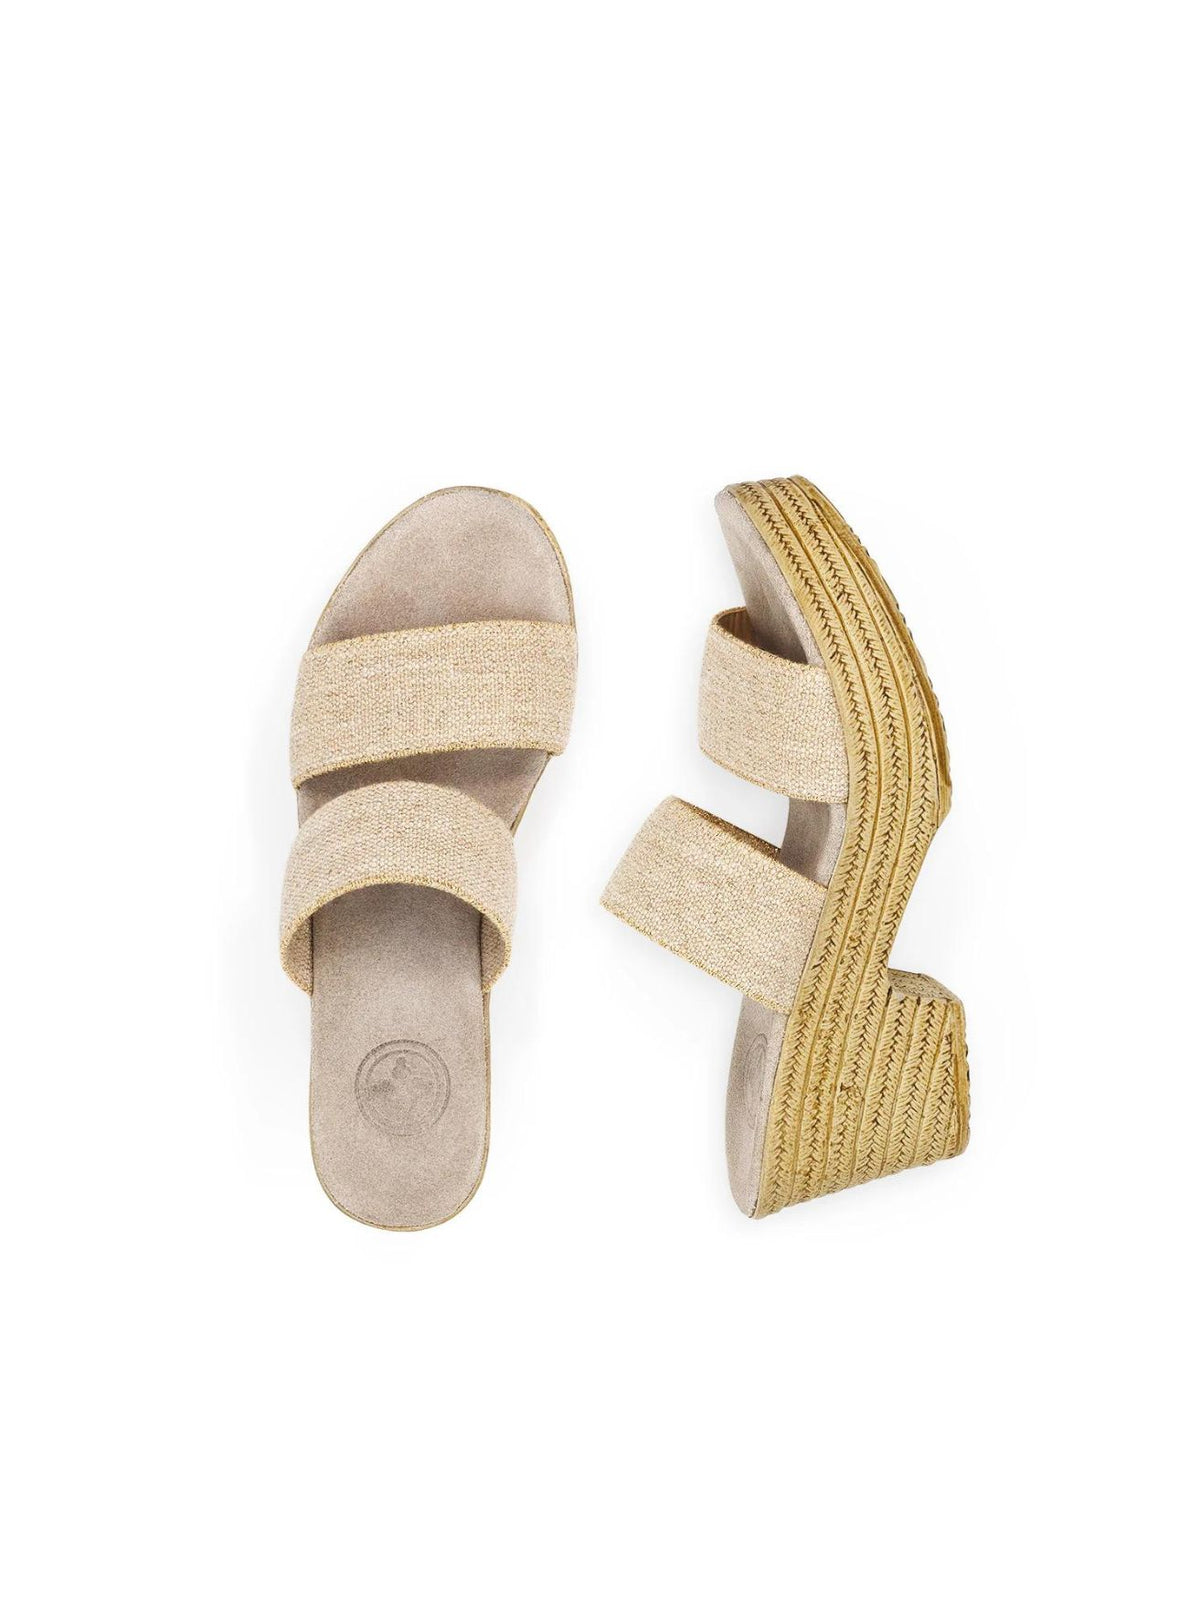 charleston shoe co thea chunky heel sandal in gold shimmer-top view